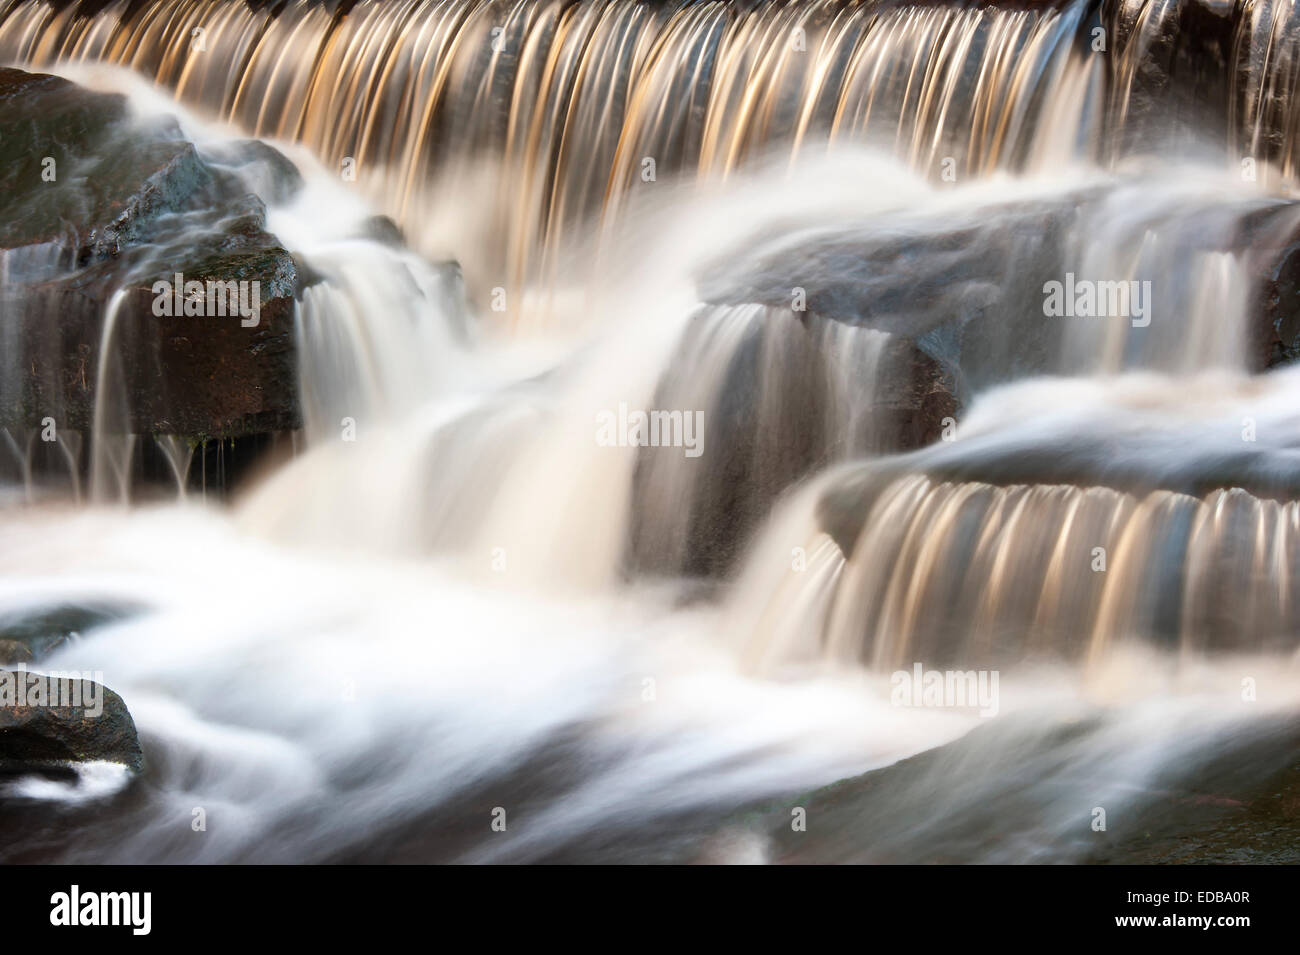 A small moorland stream cascading over a weir captured using a slow shutter speed to blur the movement of the water. Stock Photo